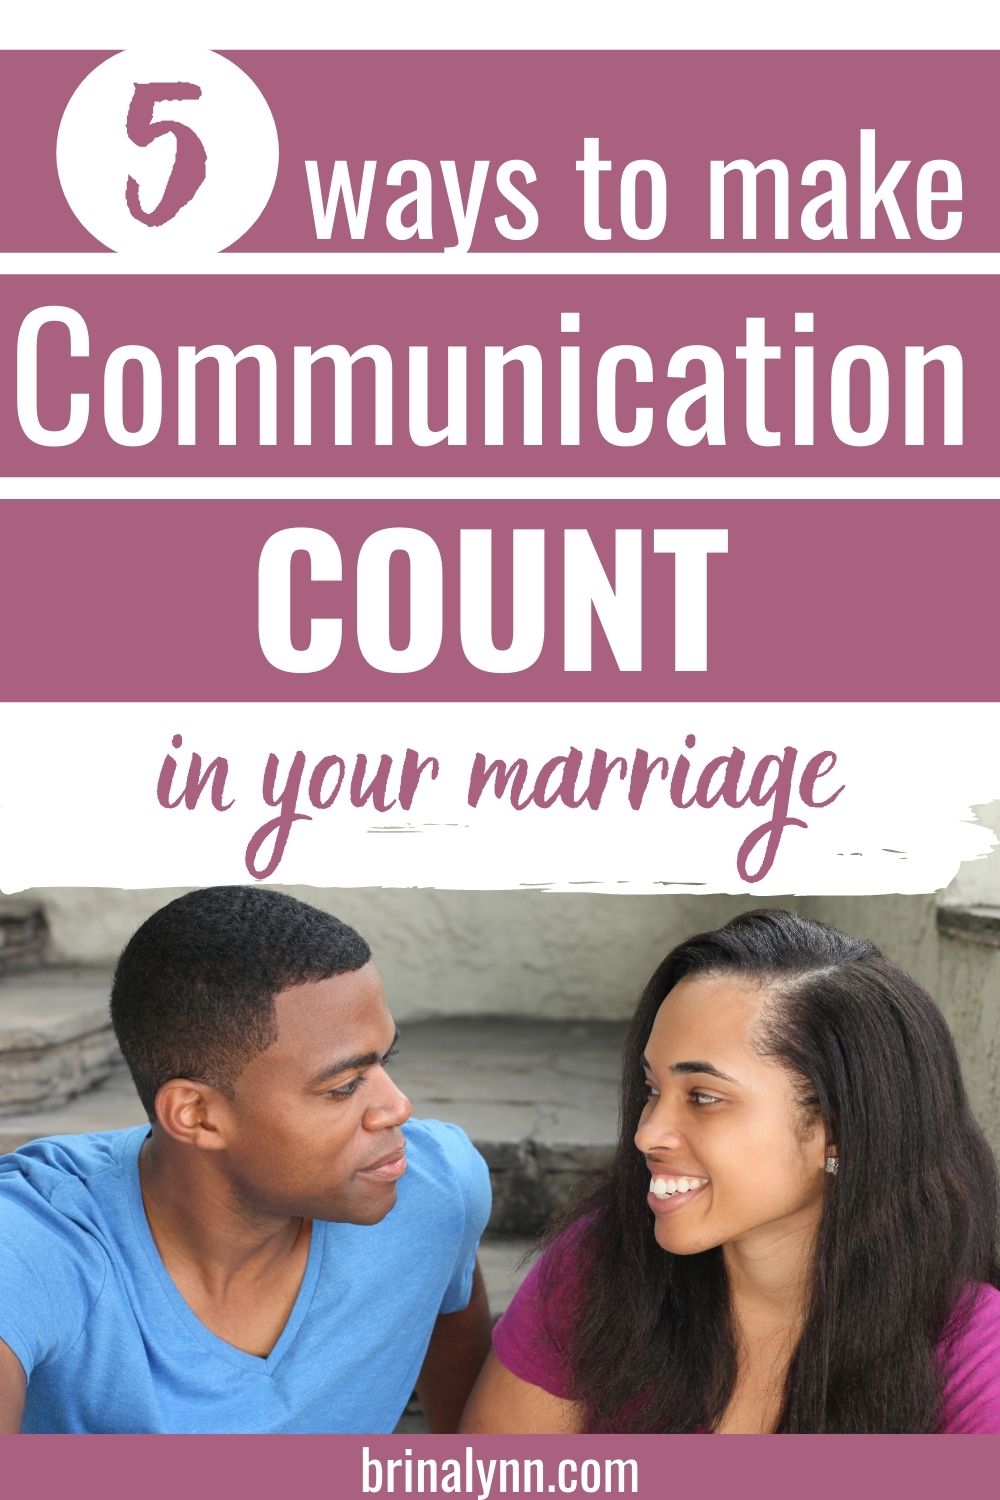 5 Ways to Make Communication Count in your Marriage